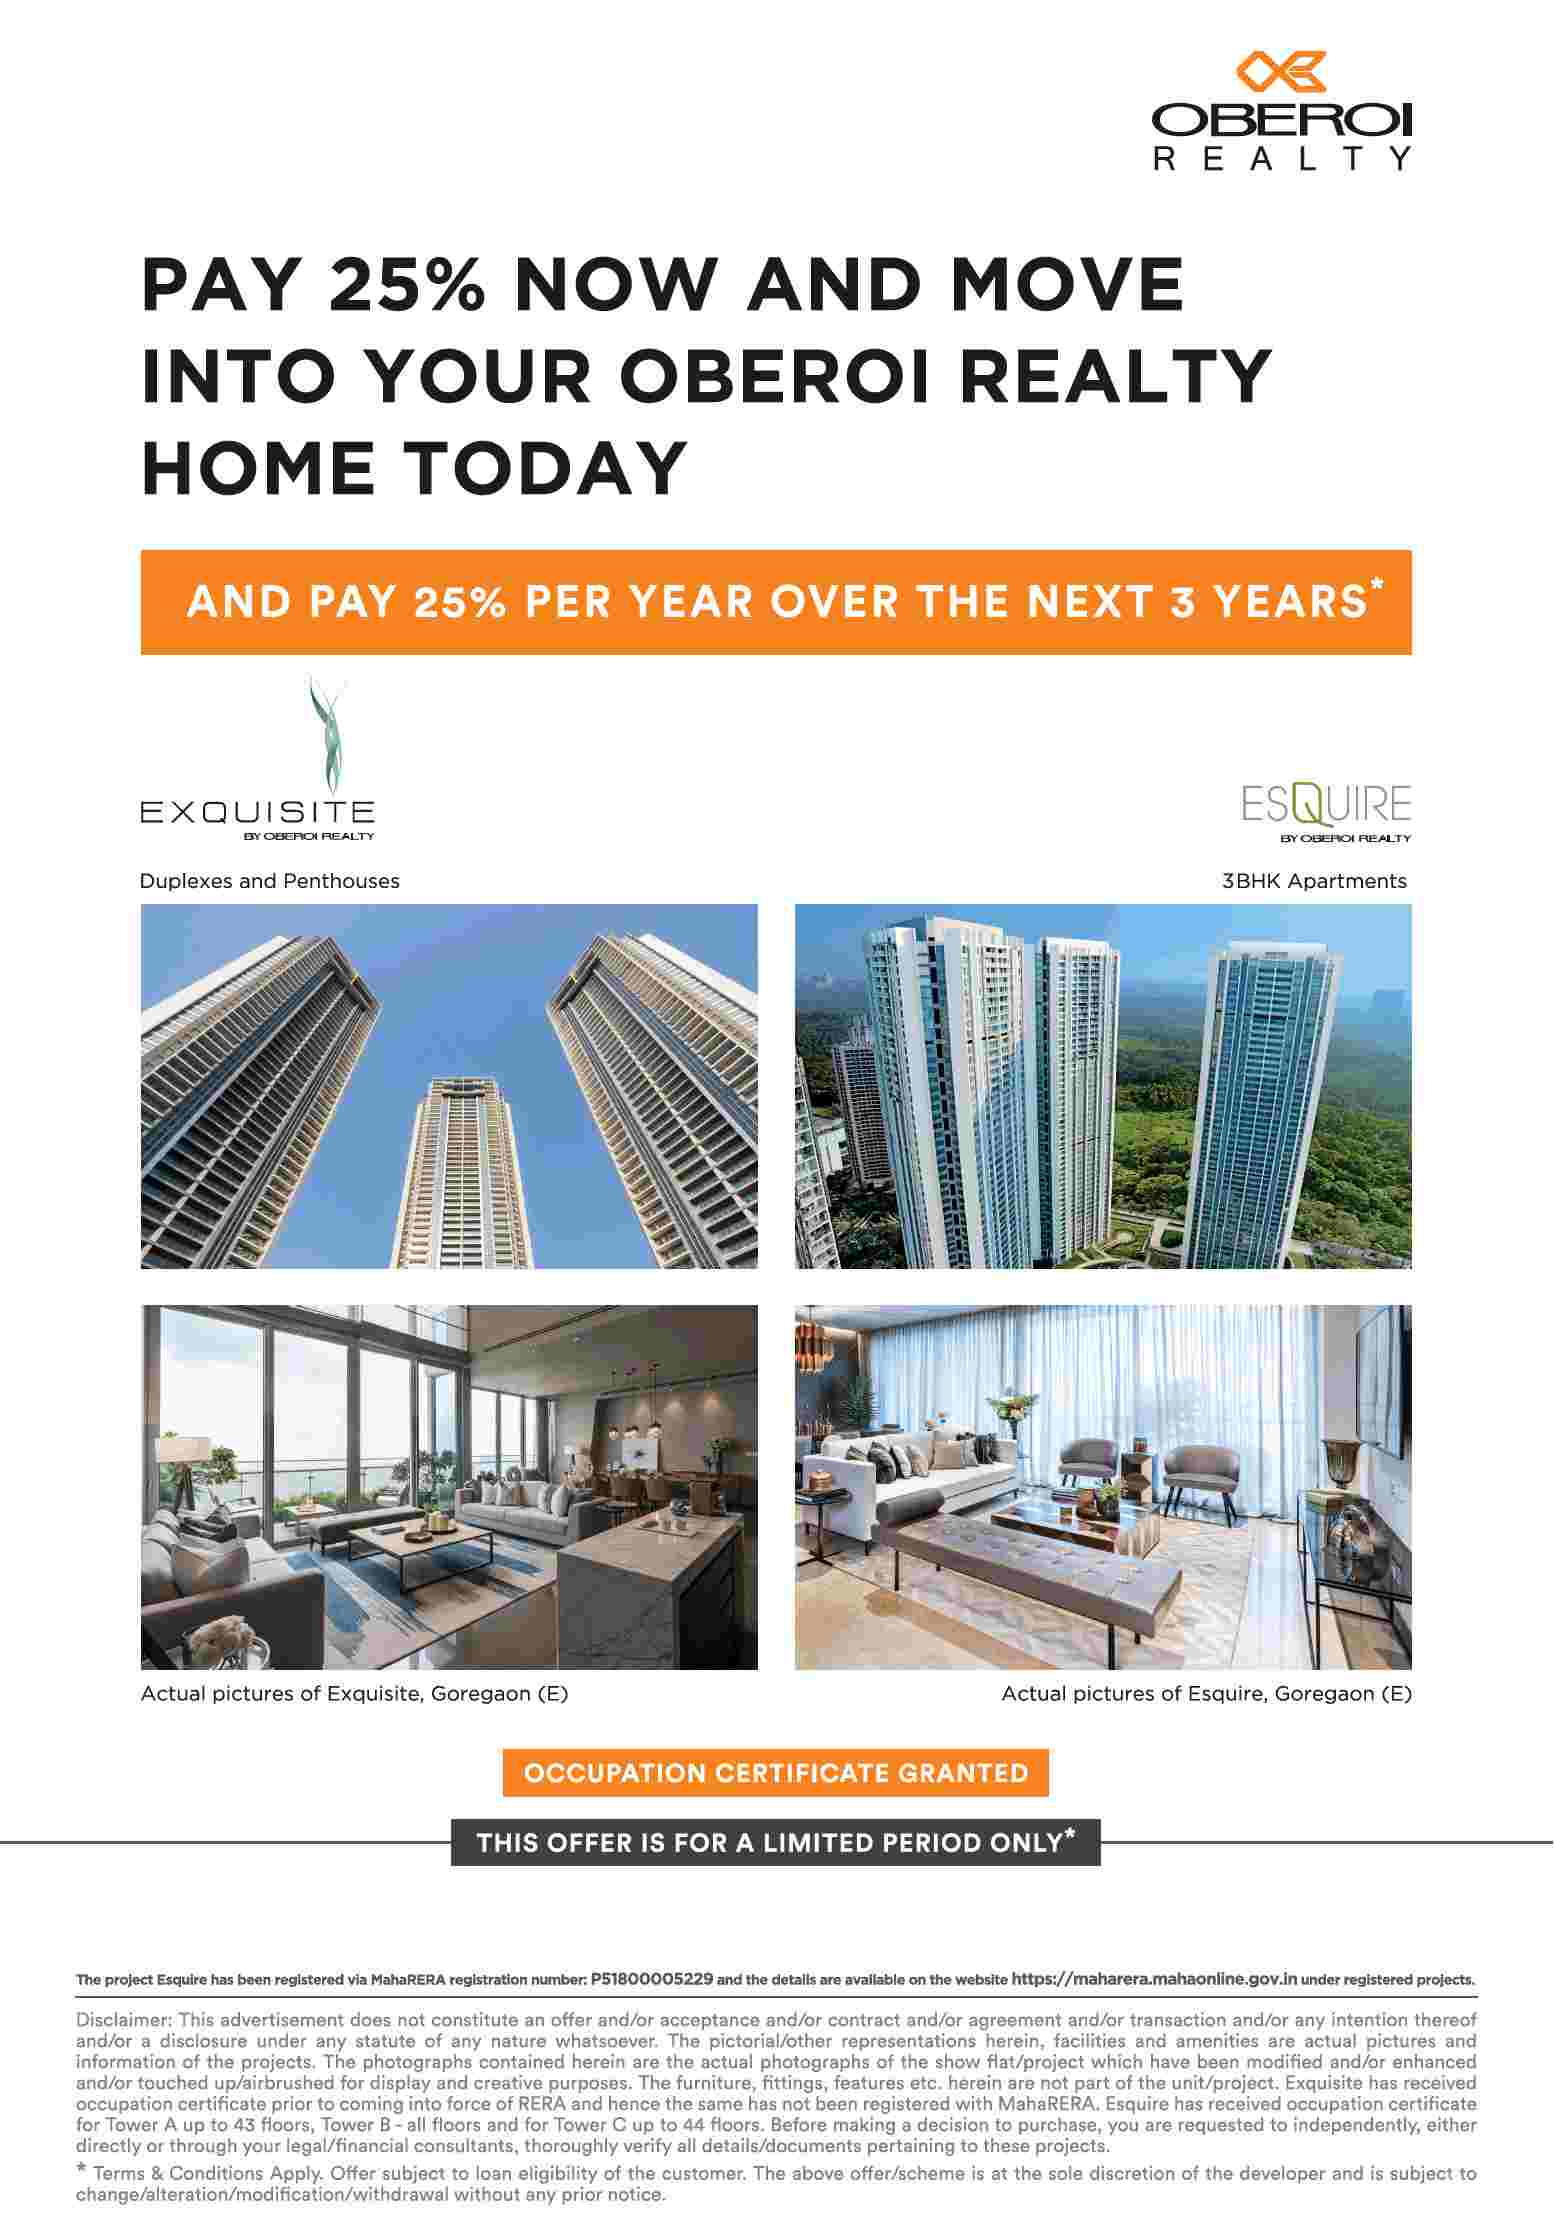 Pay 25% now and move into your Oberoi Realty home today in Mumbai